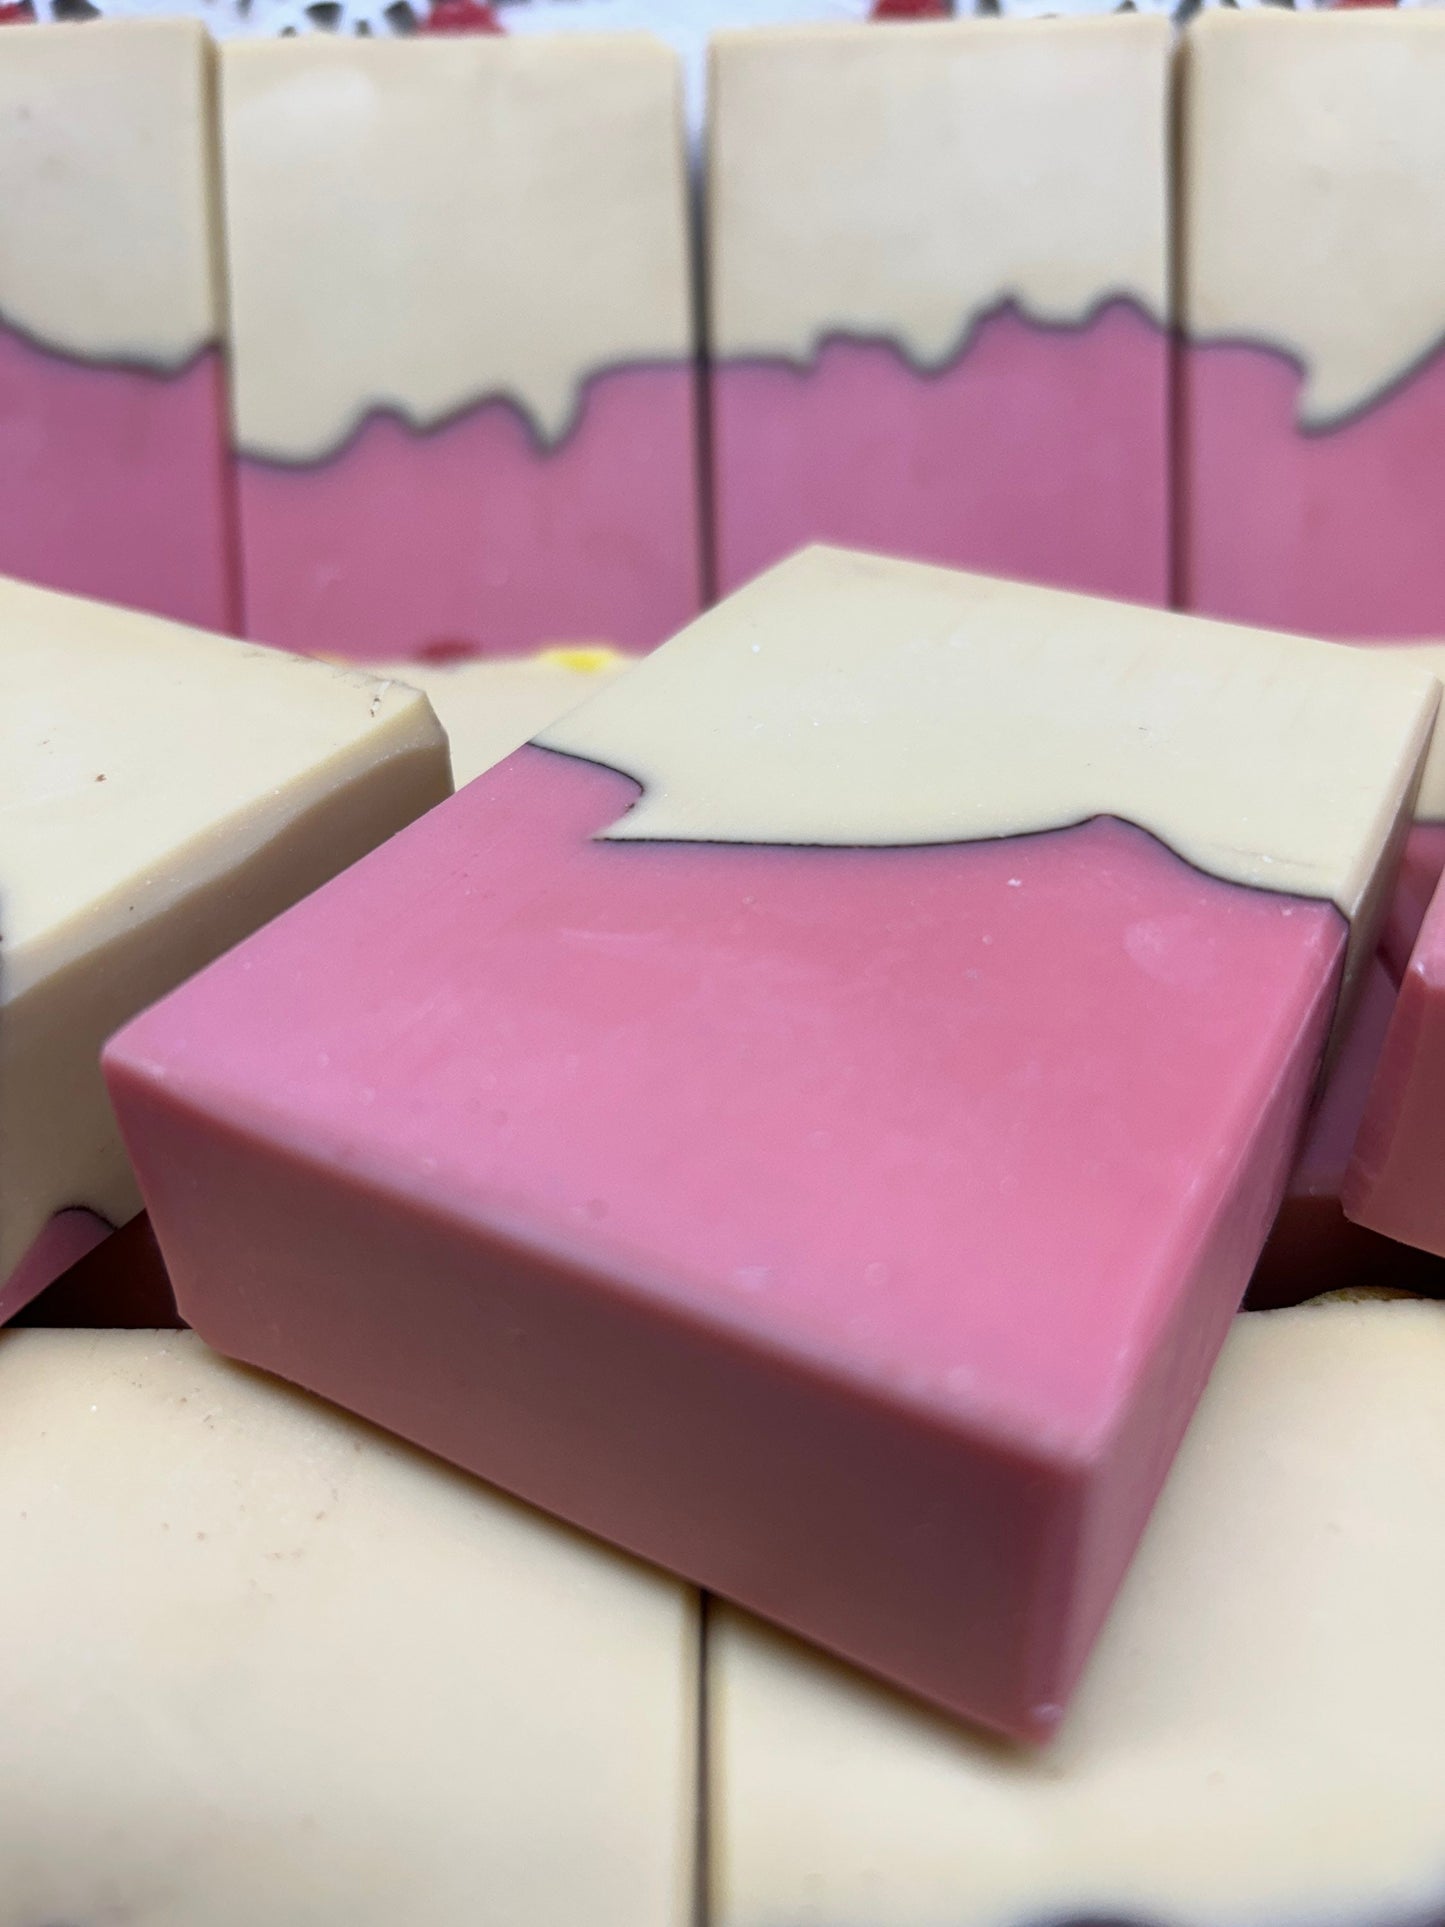 Banana Raspberry Soap, Cleansing, moisturizing, fruity scent, loads of white creamy bubbles! Great gift!